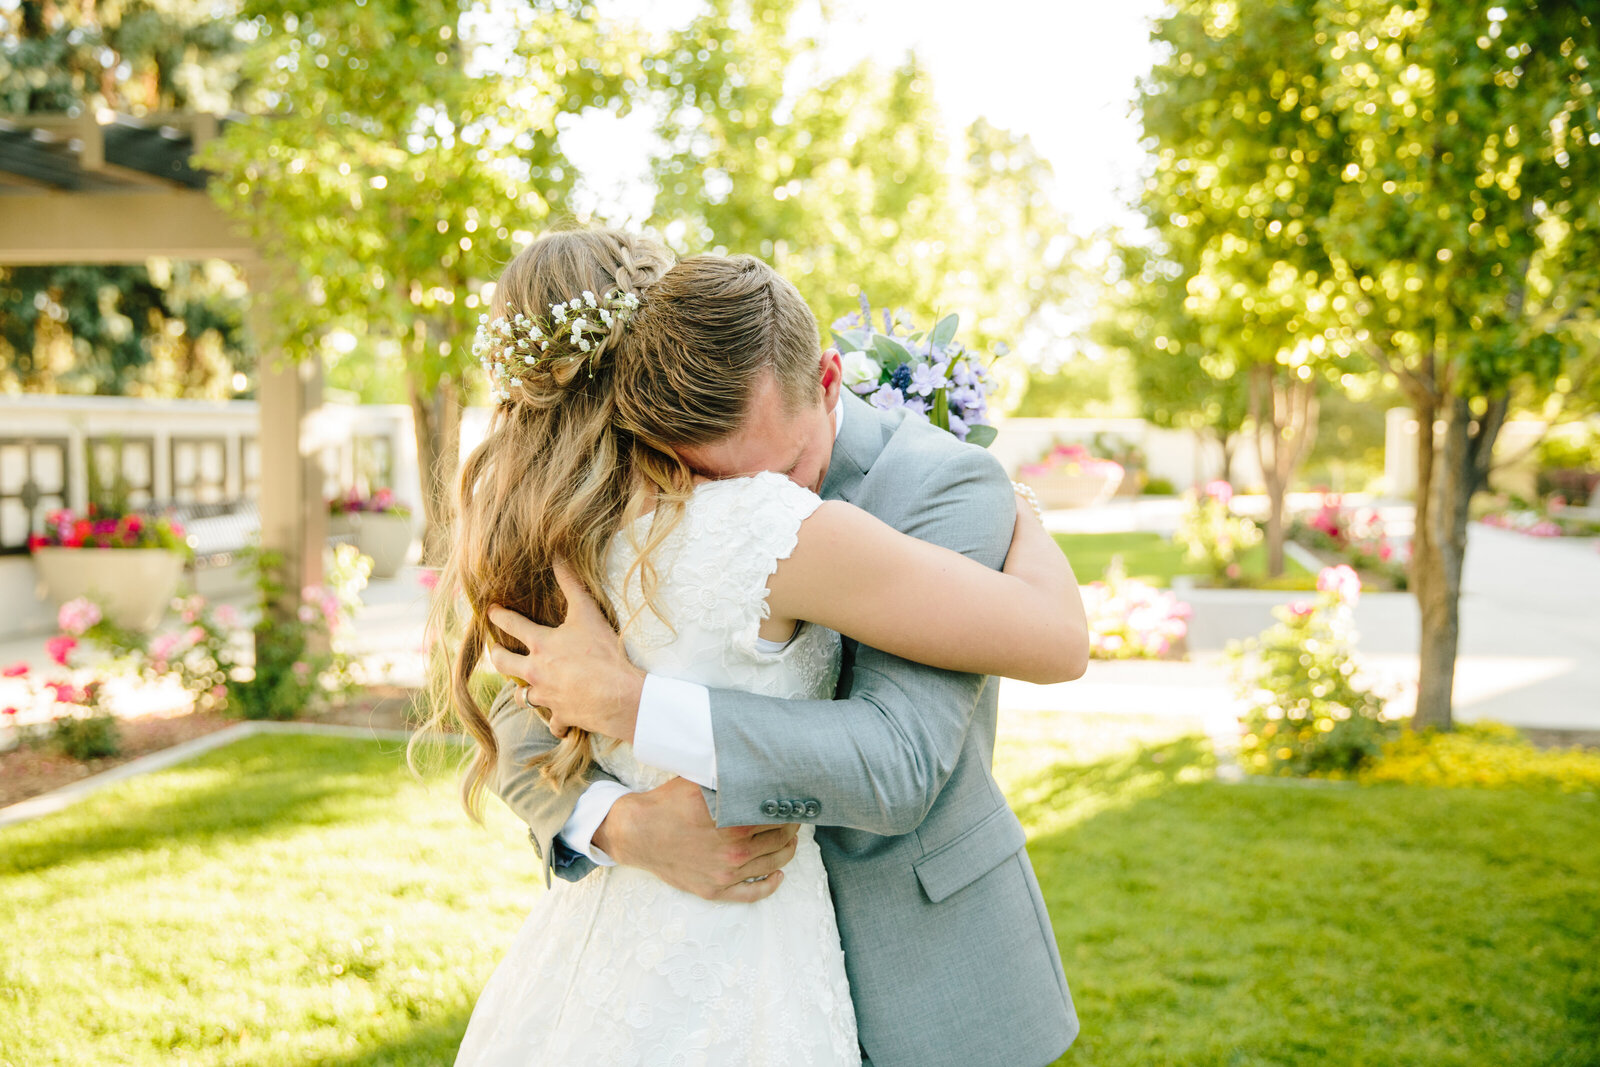 Jackson Hole photographers capture outdoor wedding of couple hugging after first look in Jackson Hole wedding